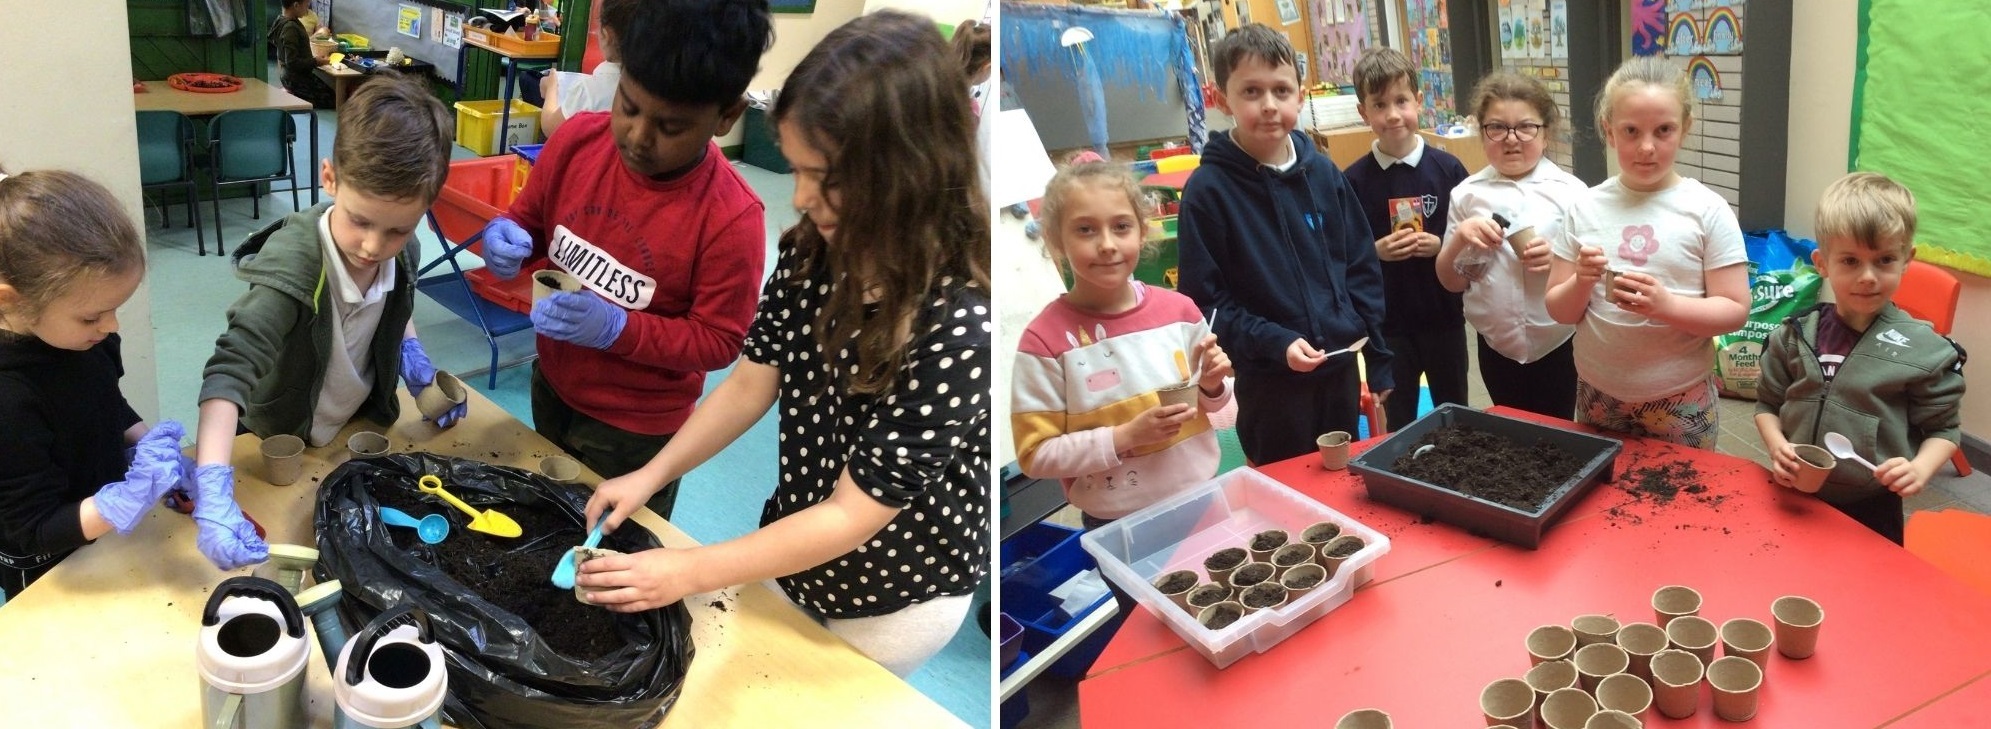 Planting sunflower seeds to sell at St Giles School, in a fundraiser for Ukraine.